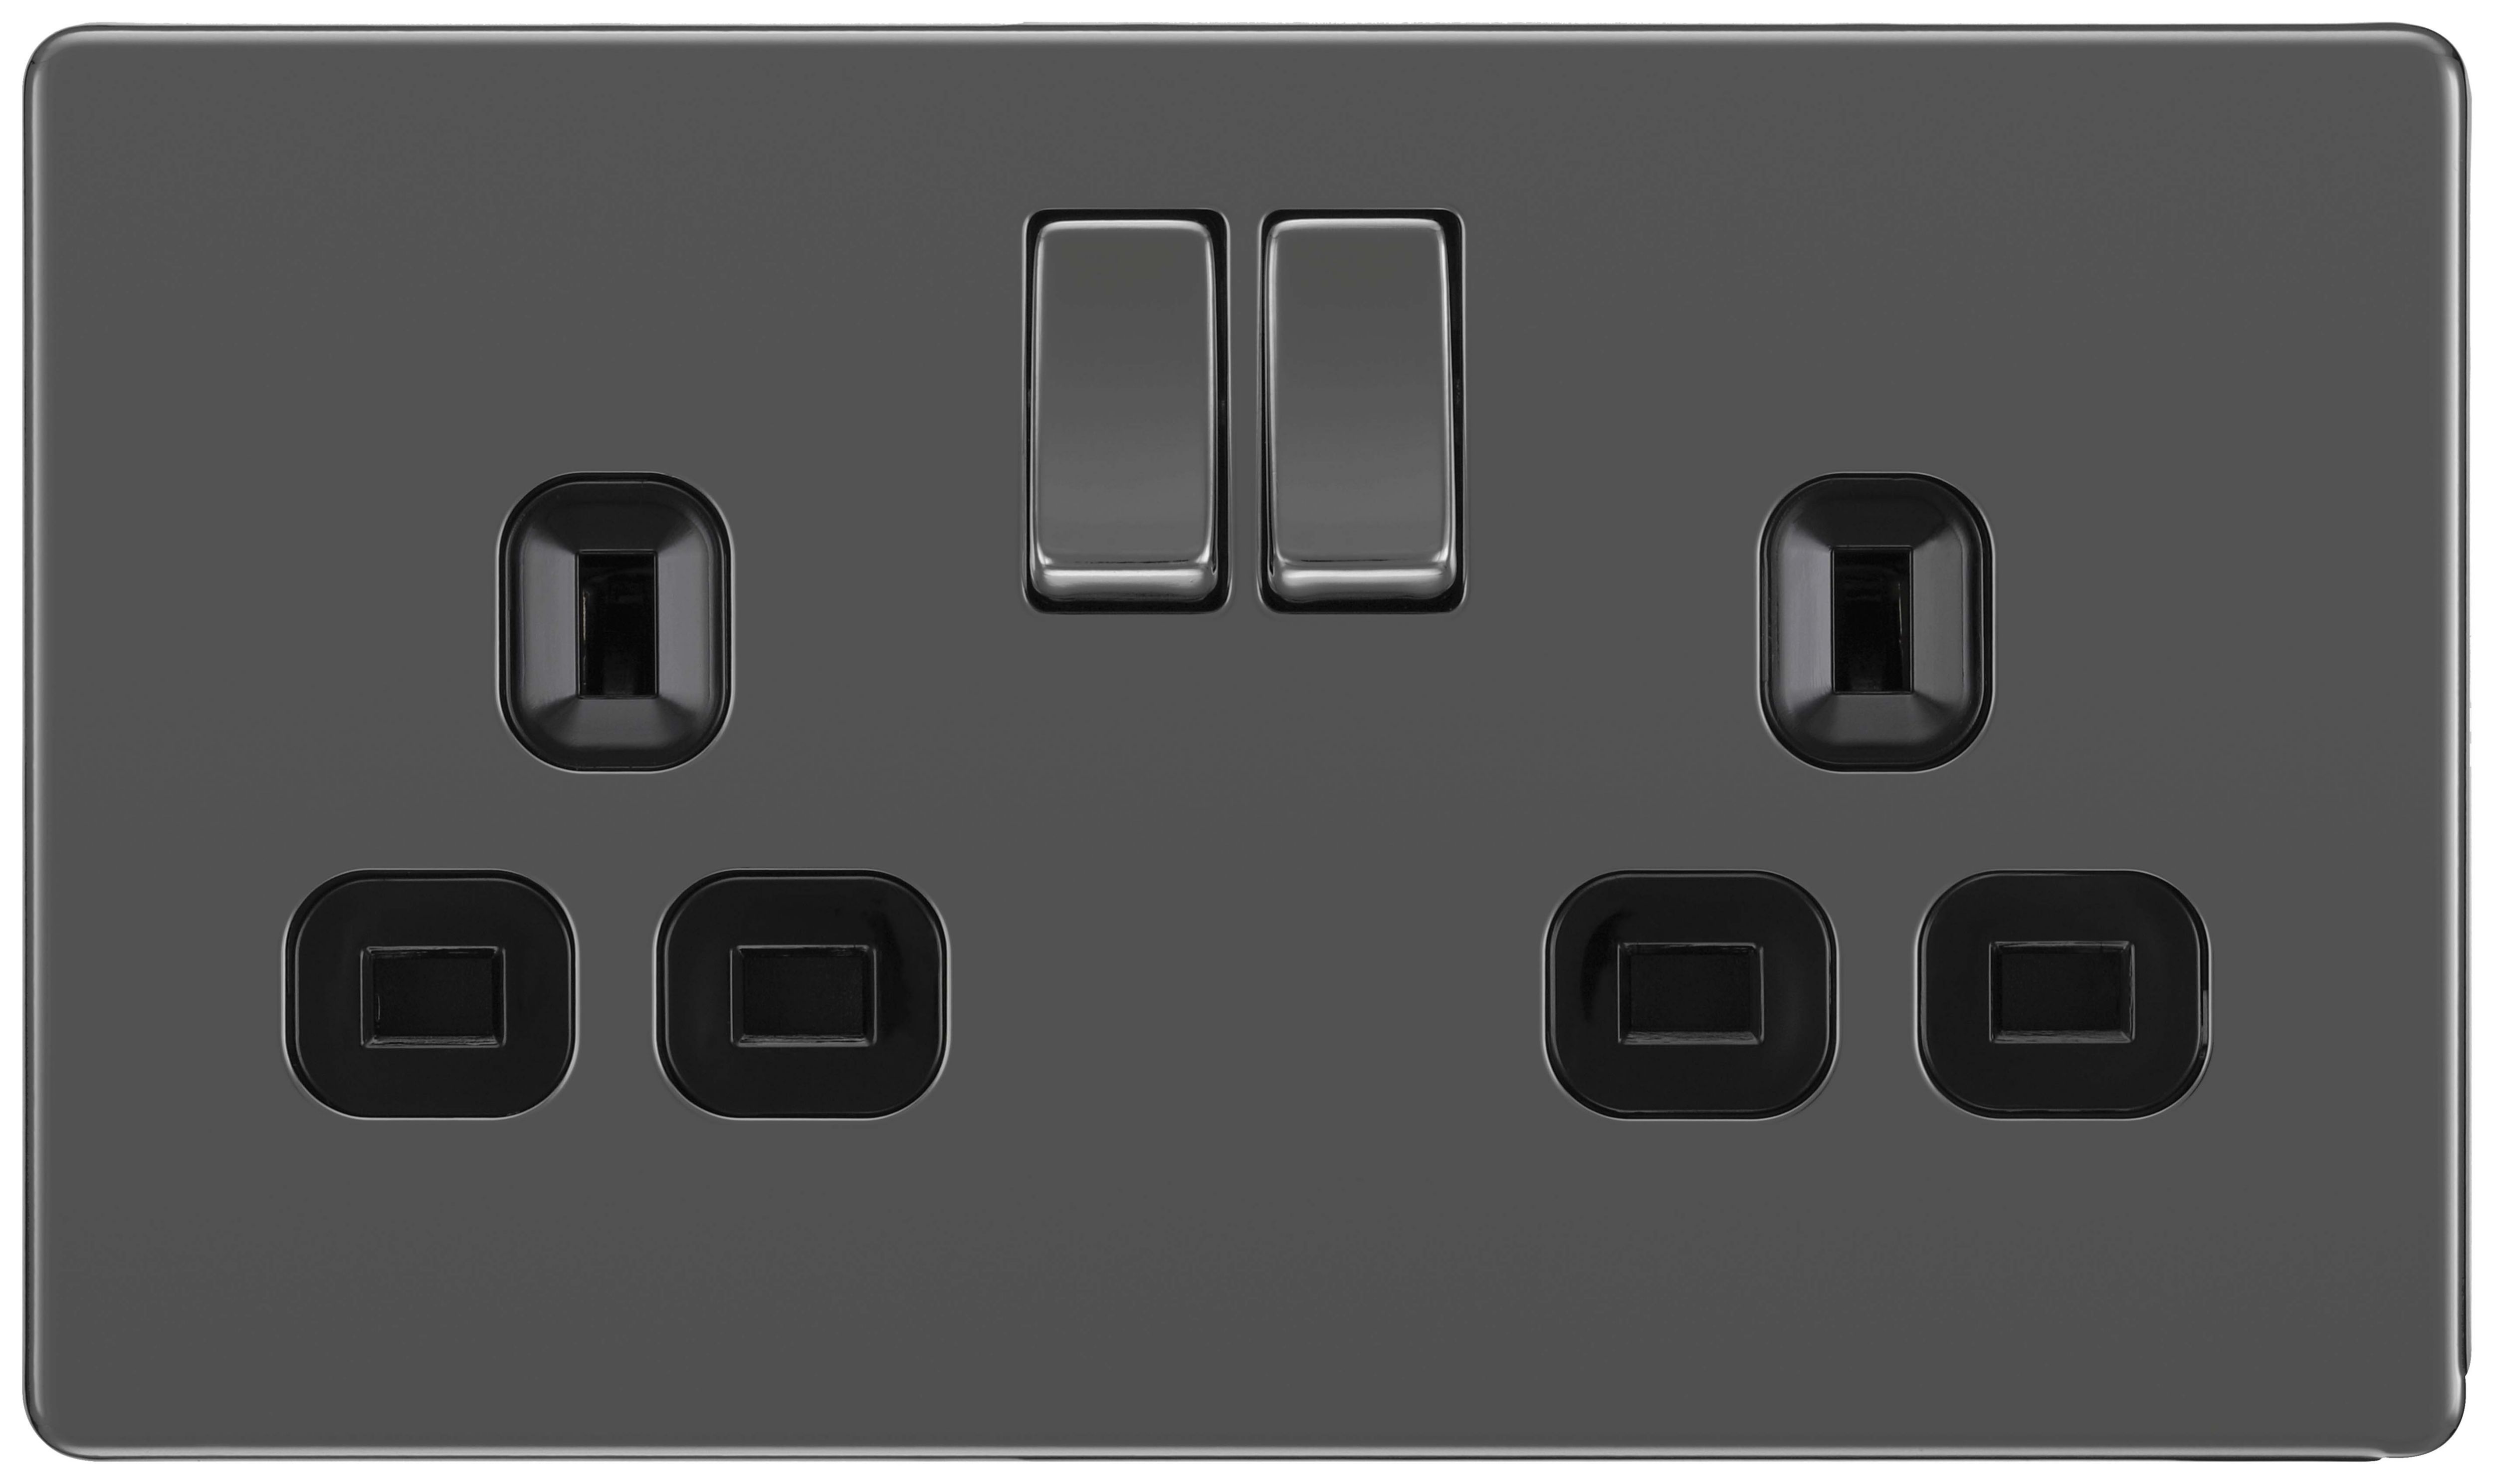 BG 13A Screwless Flat Plate Double Switched Power Socket Double Pole - Black Nickel